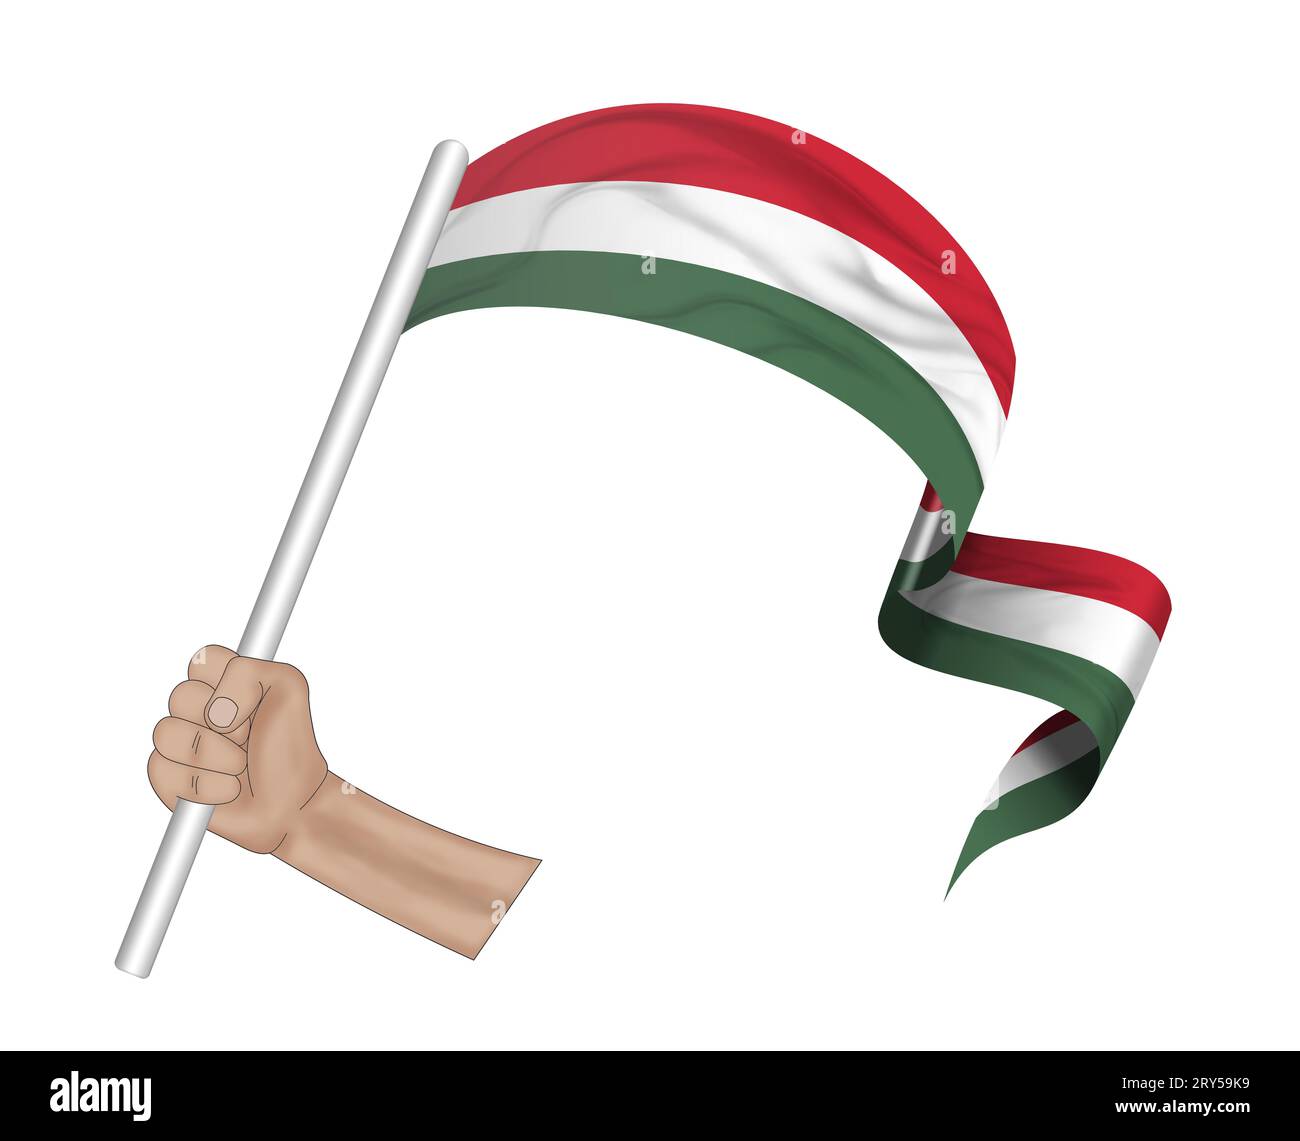 3D illustration. Hand holding flag of Hungary on a fabric ribbon background. Stock Photo